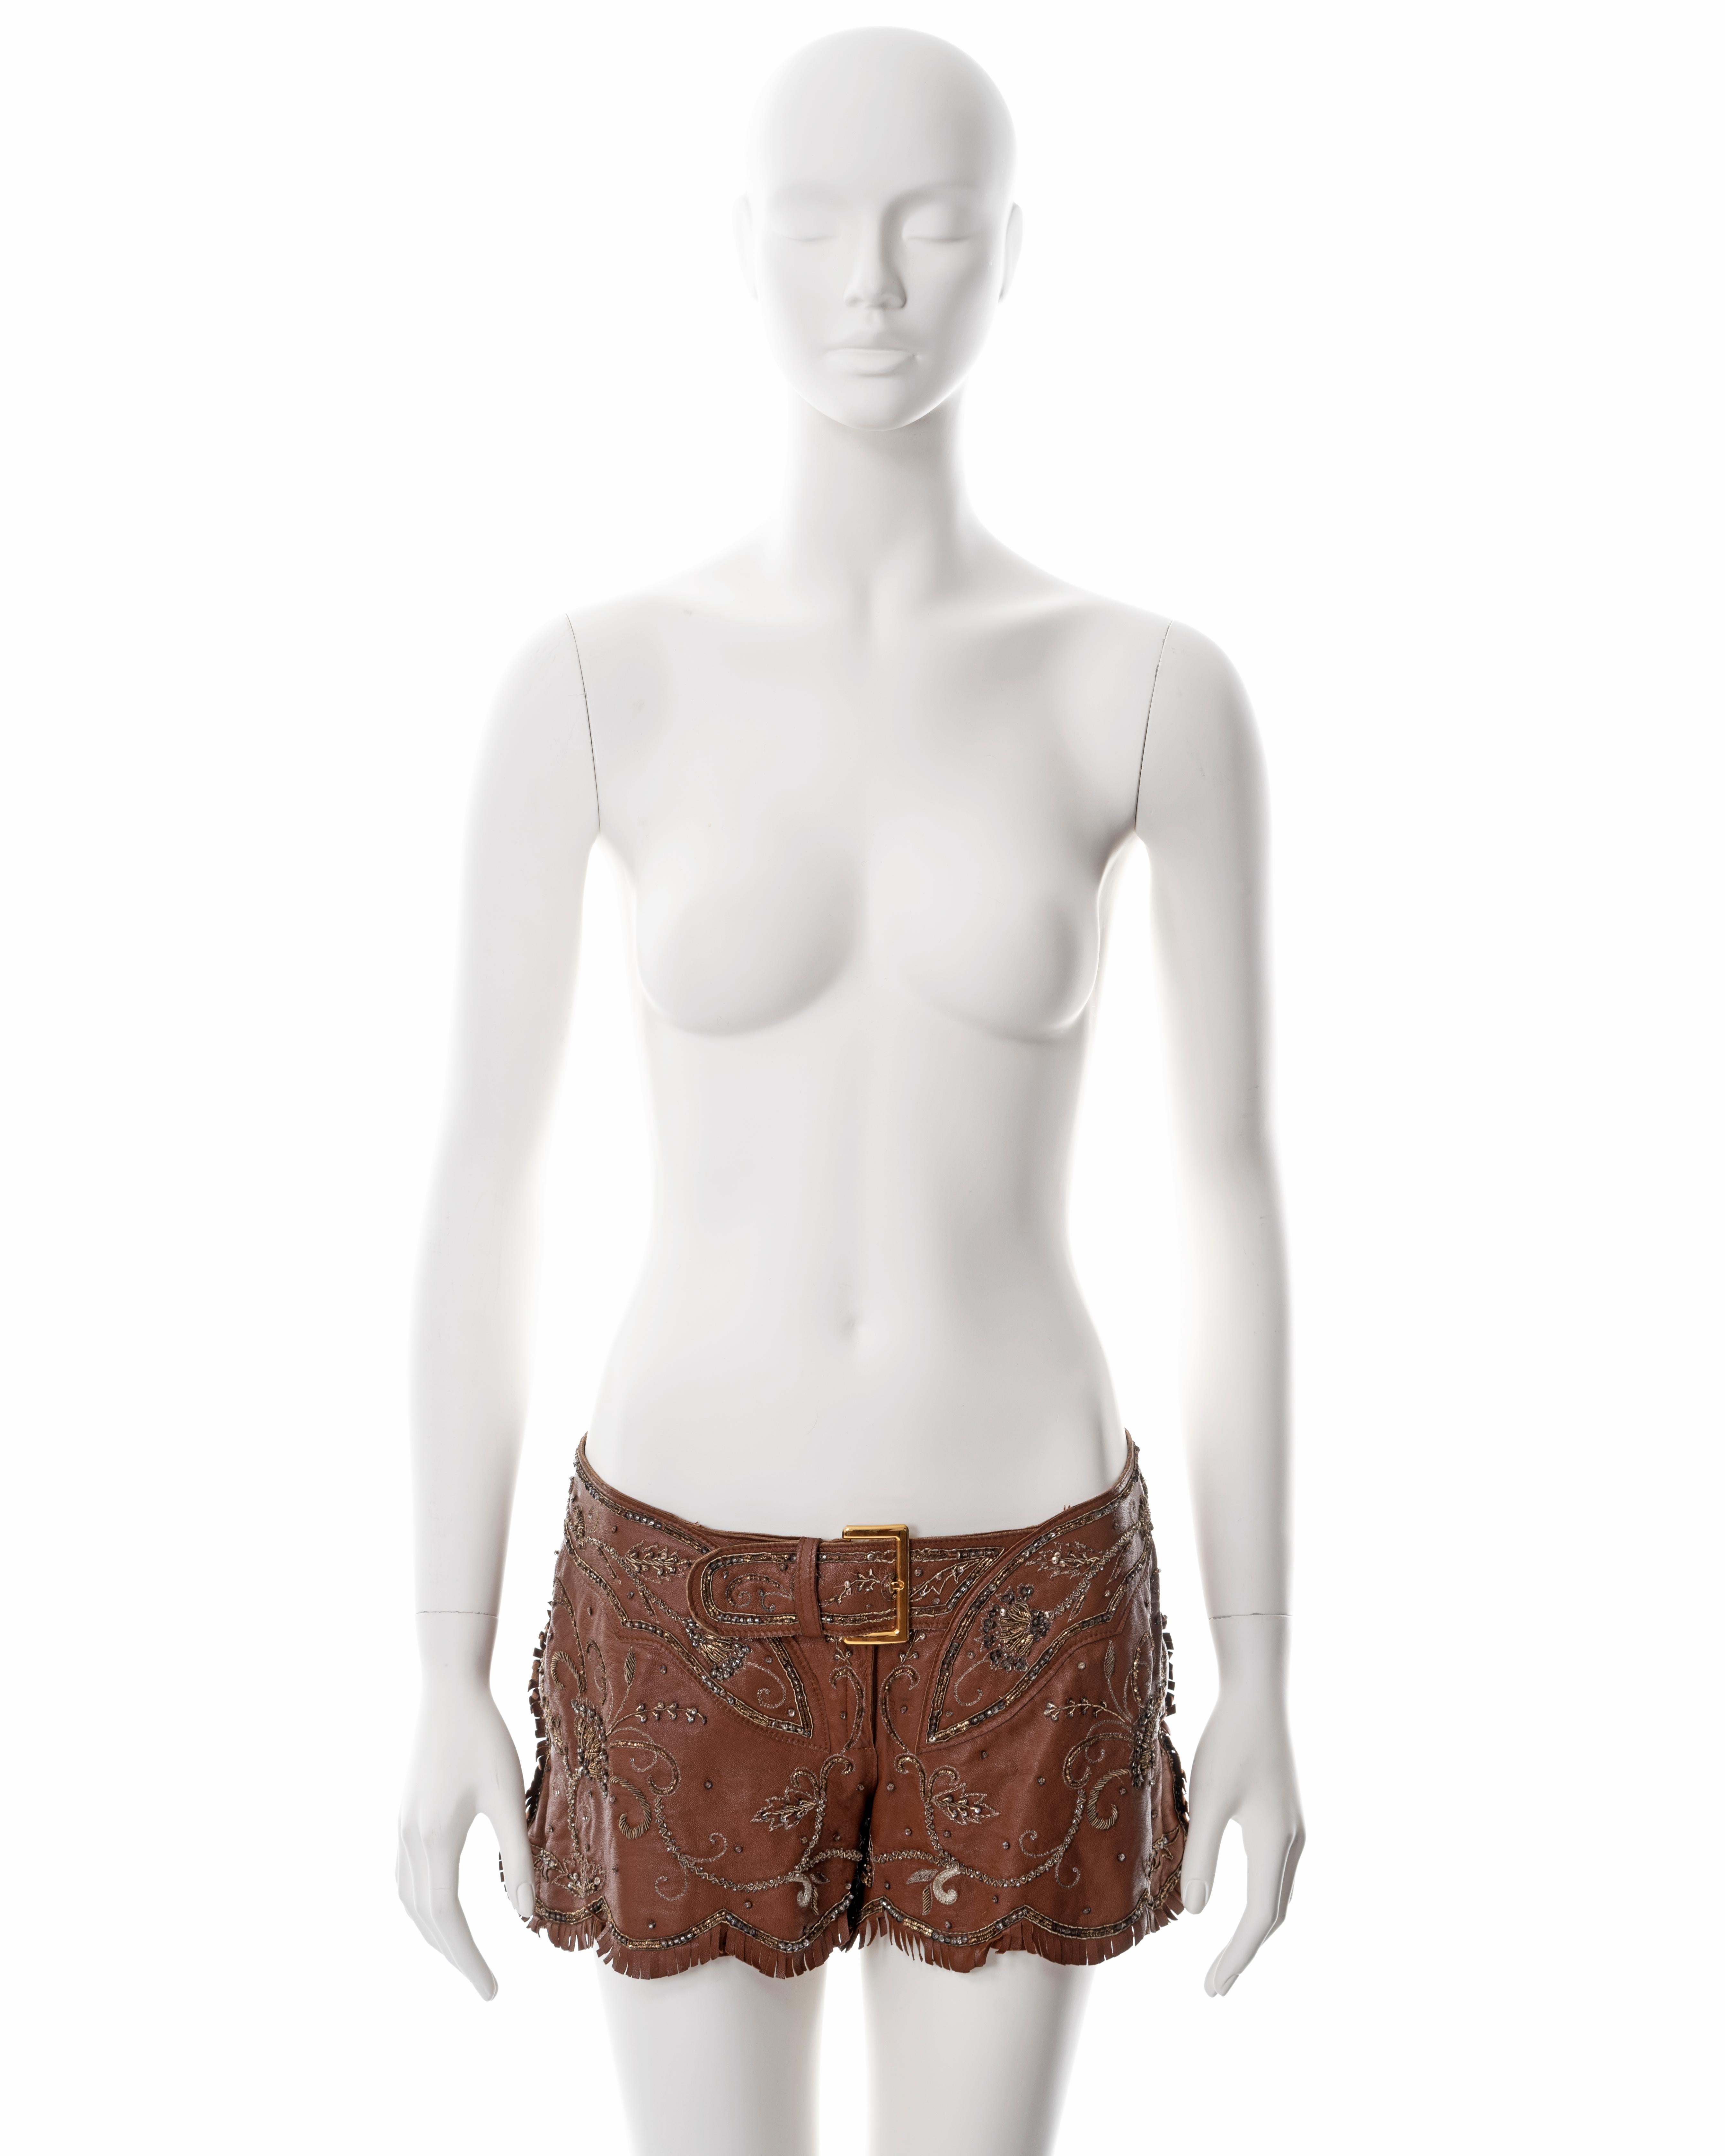 ▪ Dolce & Gabbana brown goat leather hot pants 
▪ Sold by One of a Kind Archive
▪ Spring-Summer 2001
▪ Gold-tone metal buckles 
▪ Metal thread embroidery 
▪ Fringe trim 
▪ Zippers on  side seams 
▪ IT 42 - FR 38 - UK 10 
▪ Made in Italy

All